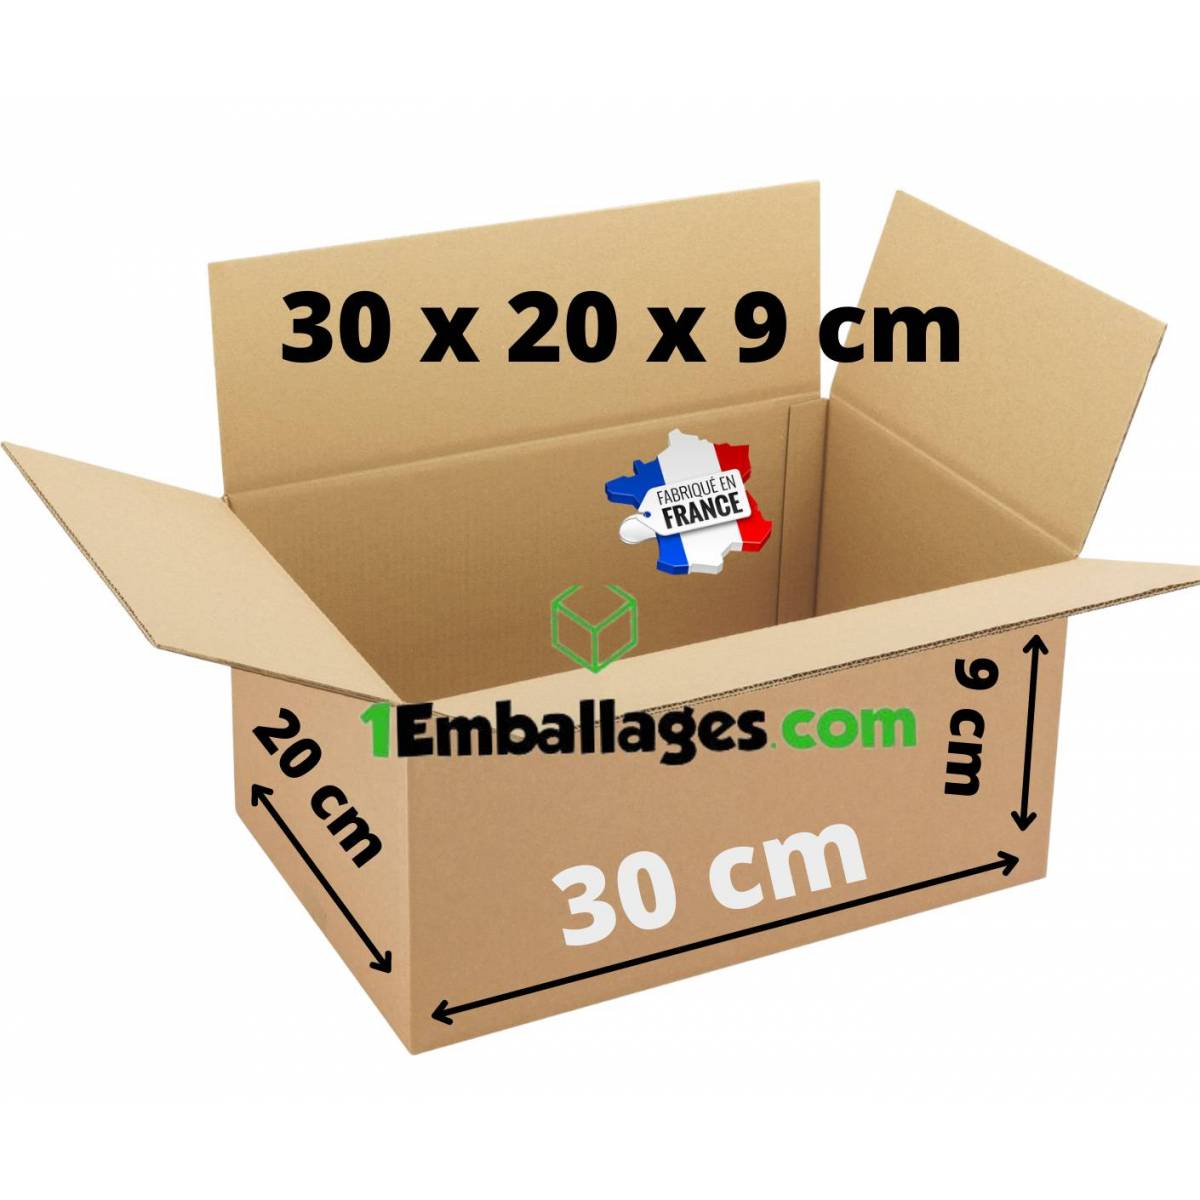 Cartons d'expeditions 300 x 200 x 90 mm pour petit objet plat, livres,  jouets -Made in France - 1Emballages.com (10) - MaxxiDiscount